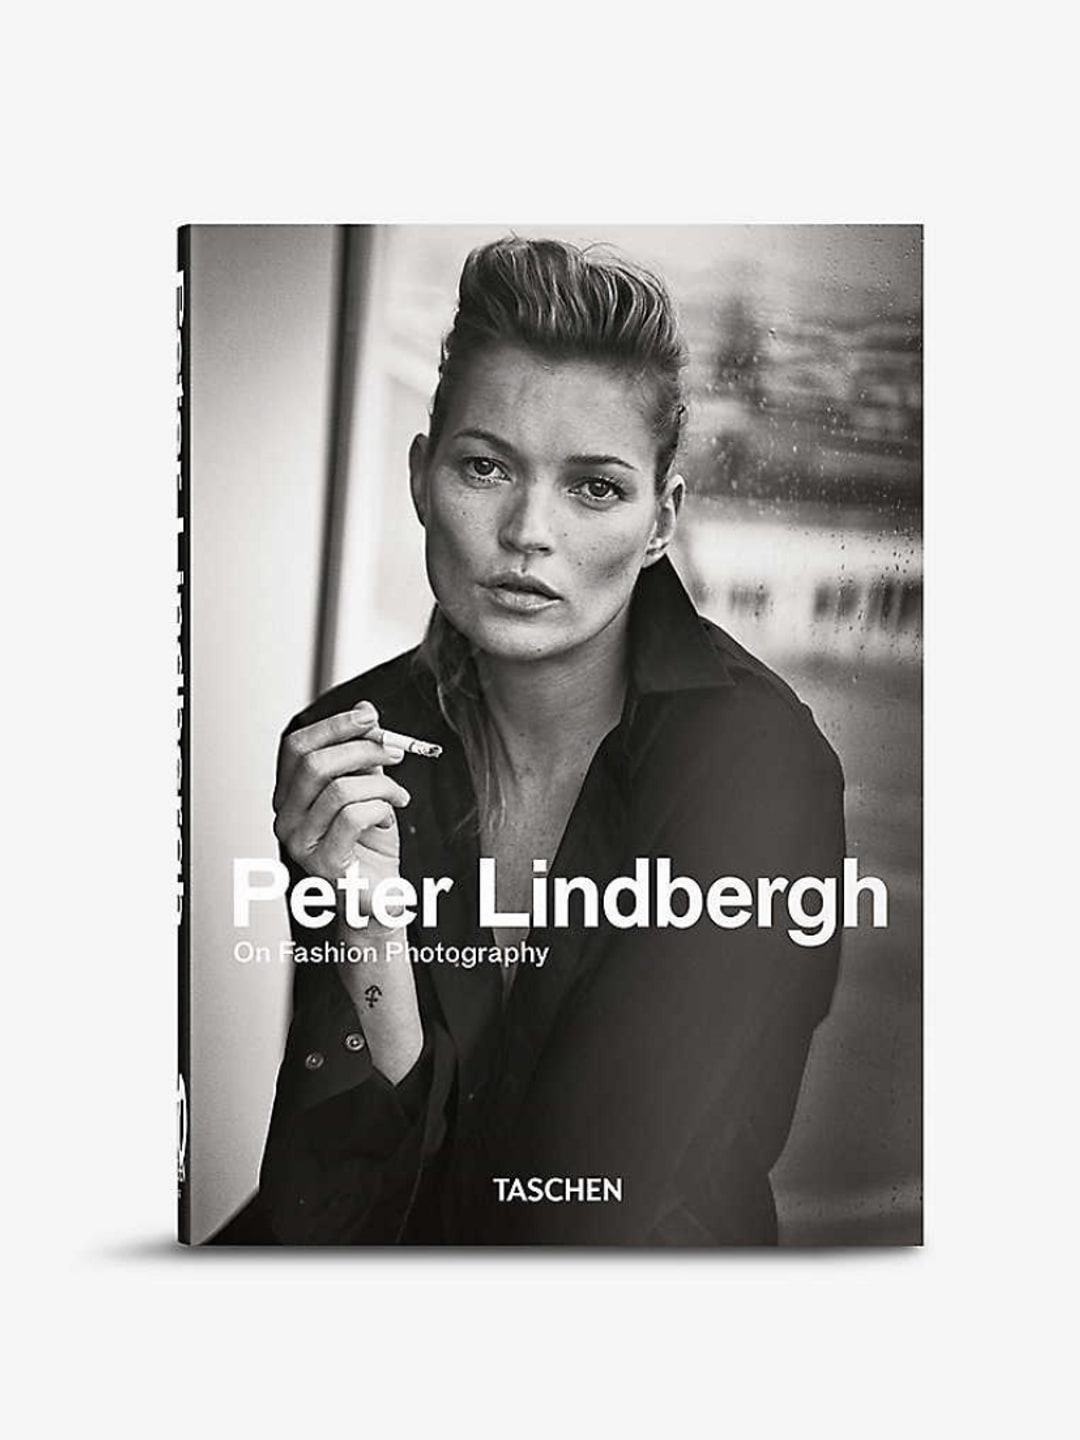 Peter Lindbergh On Fashion Photography 40th Edition hardcover book